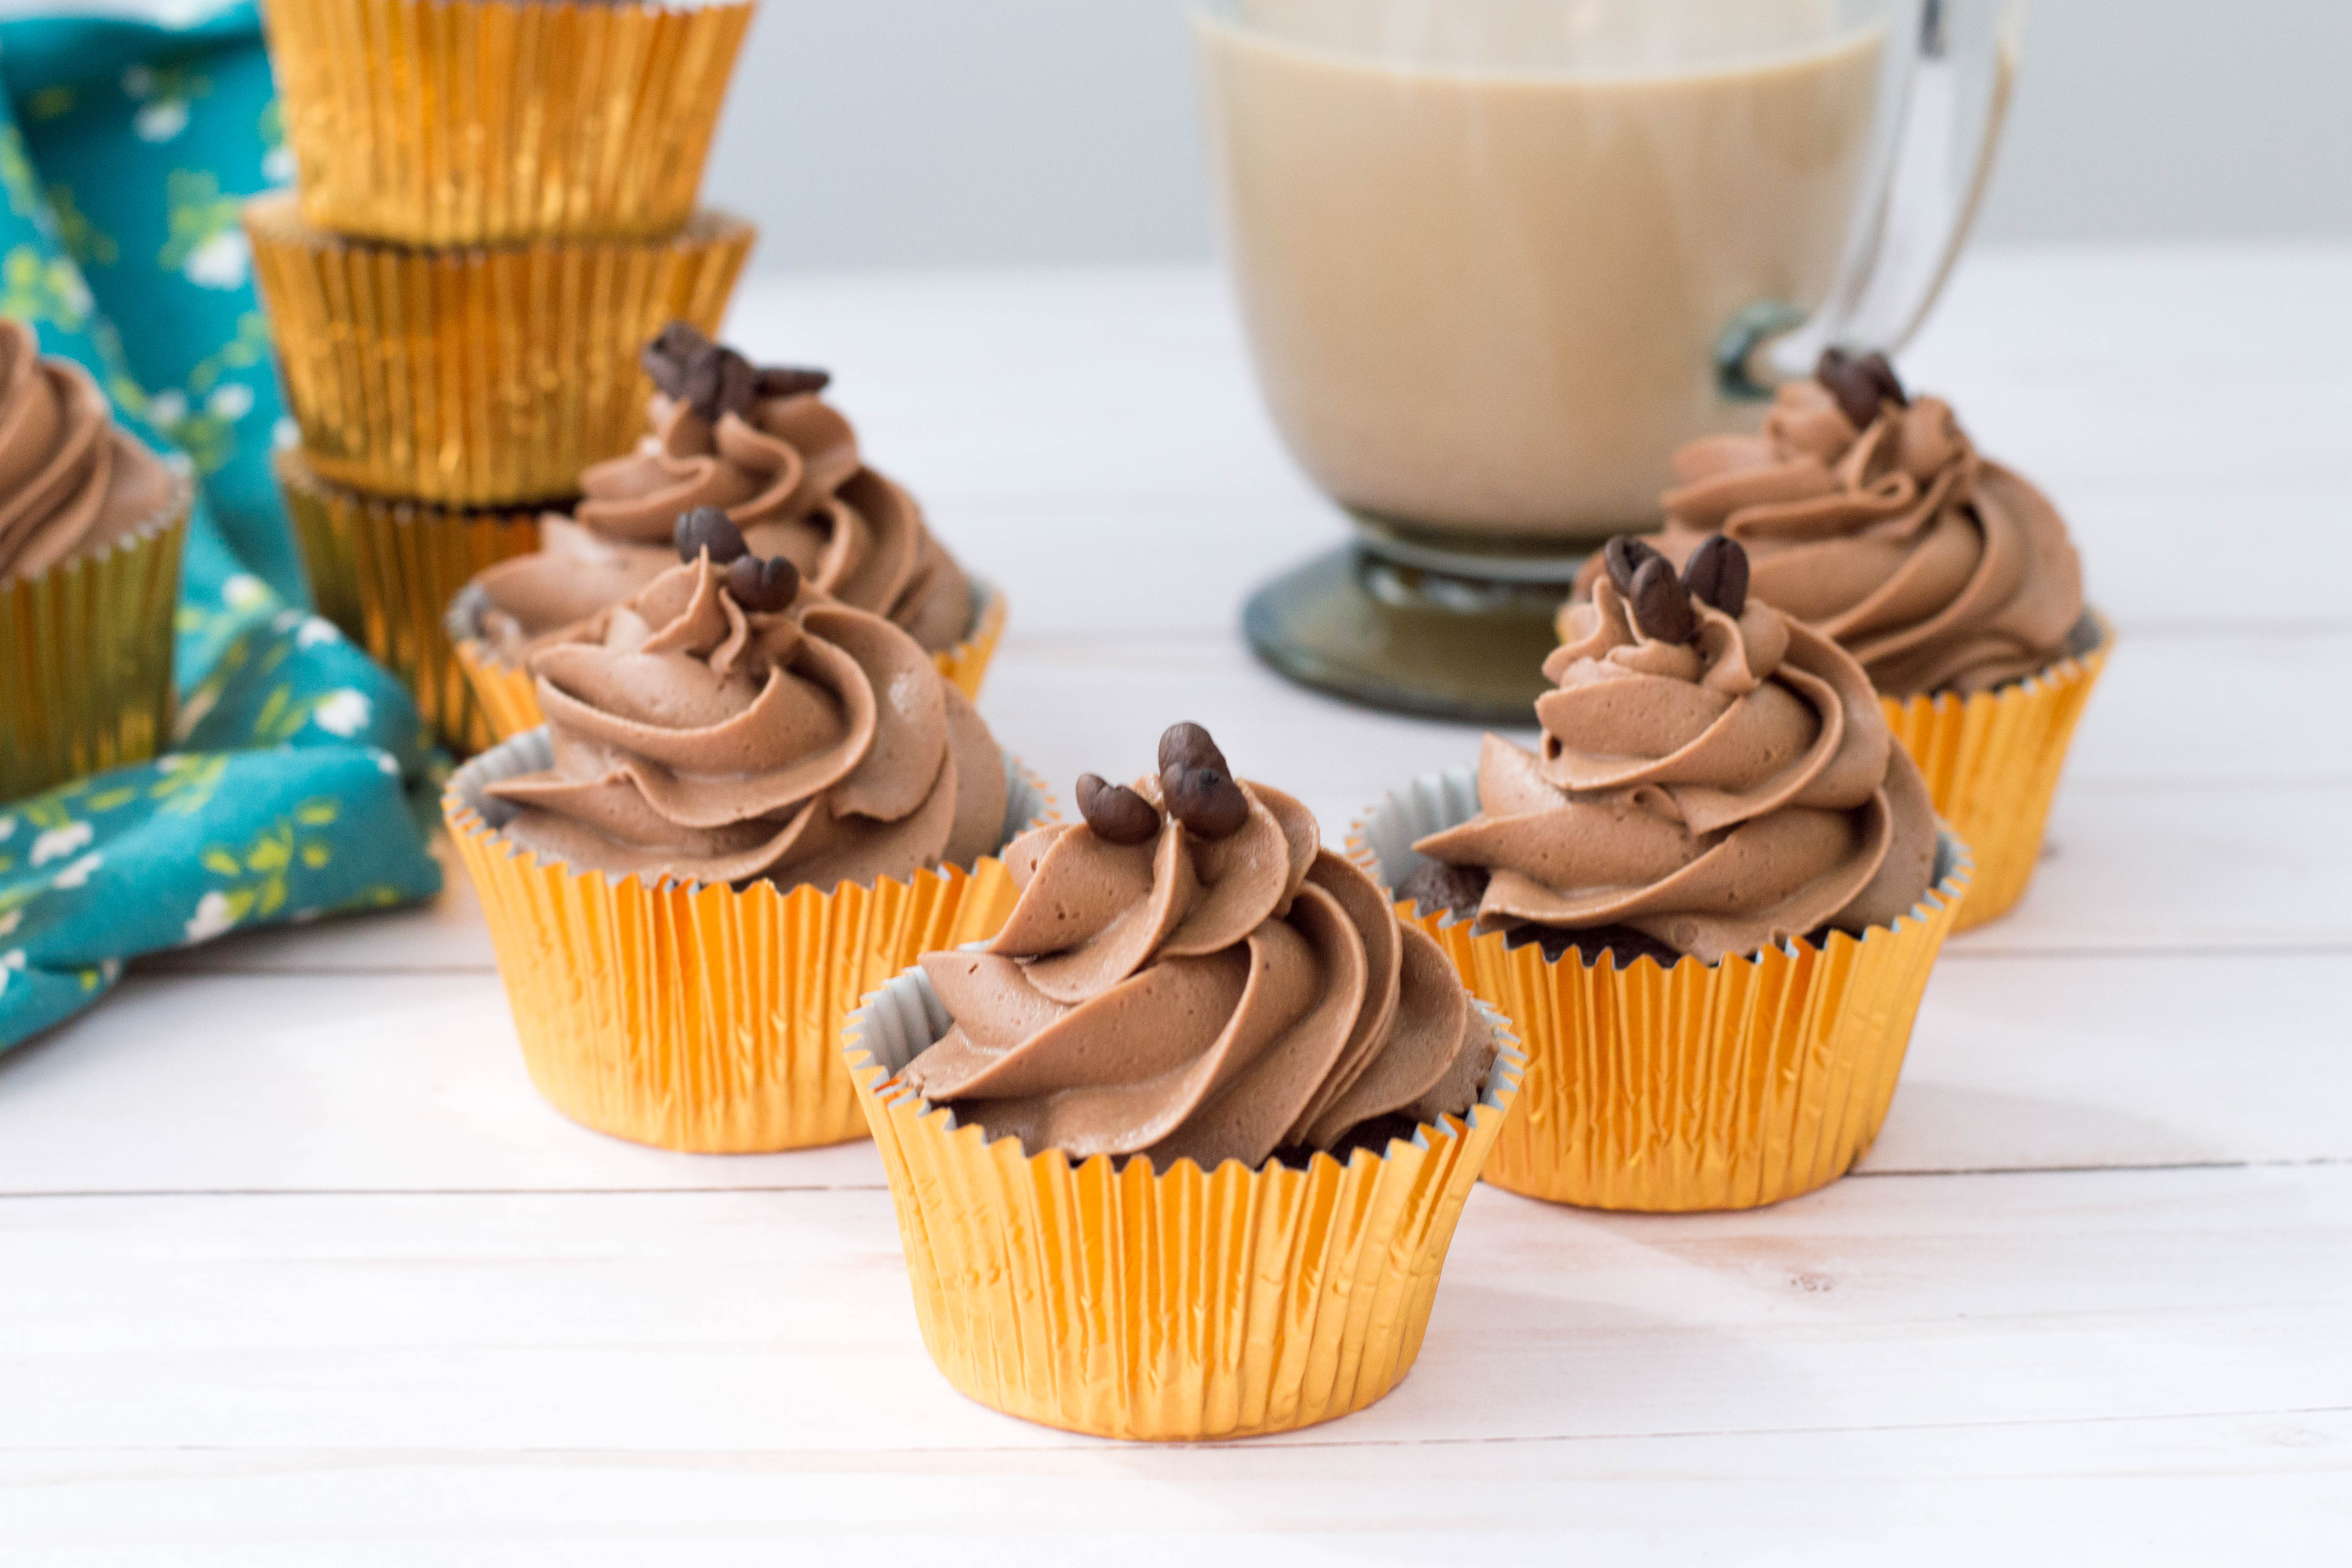 Mocha Cupcakes with Coffee Beans